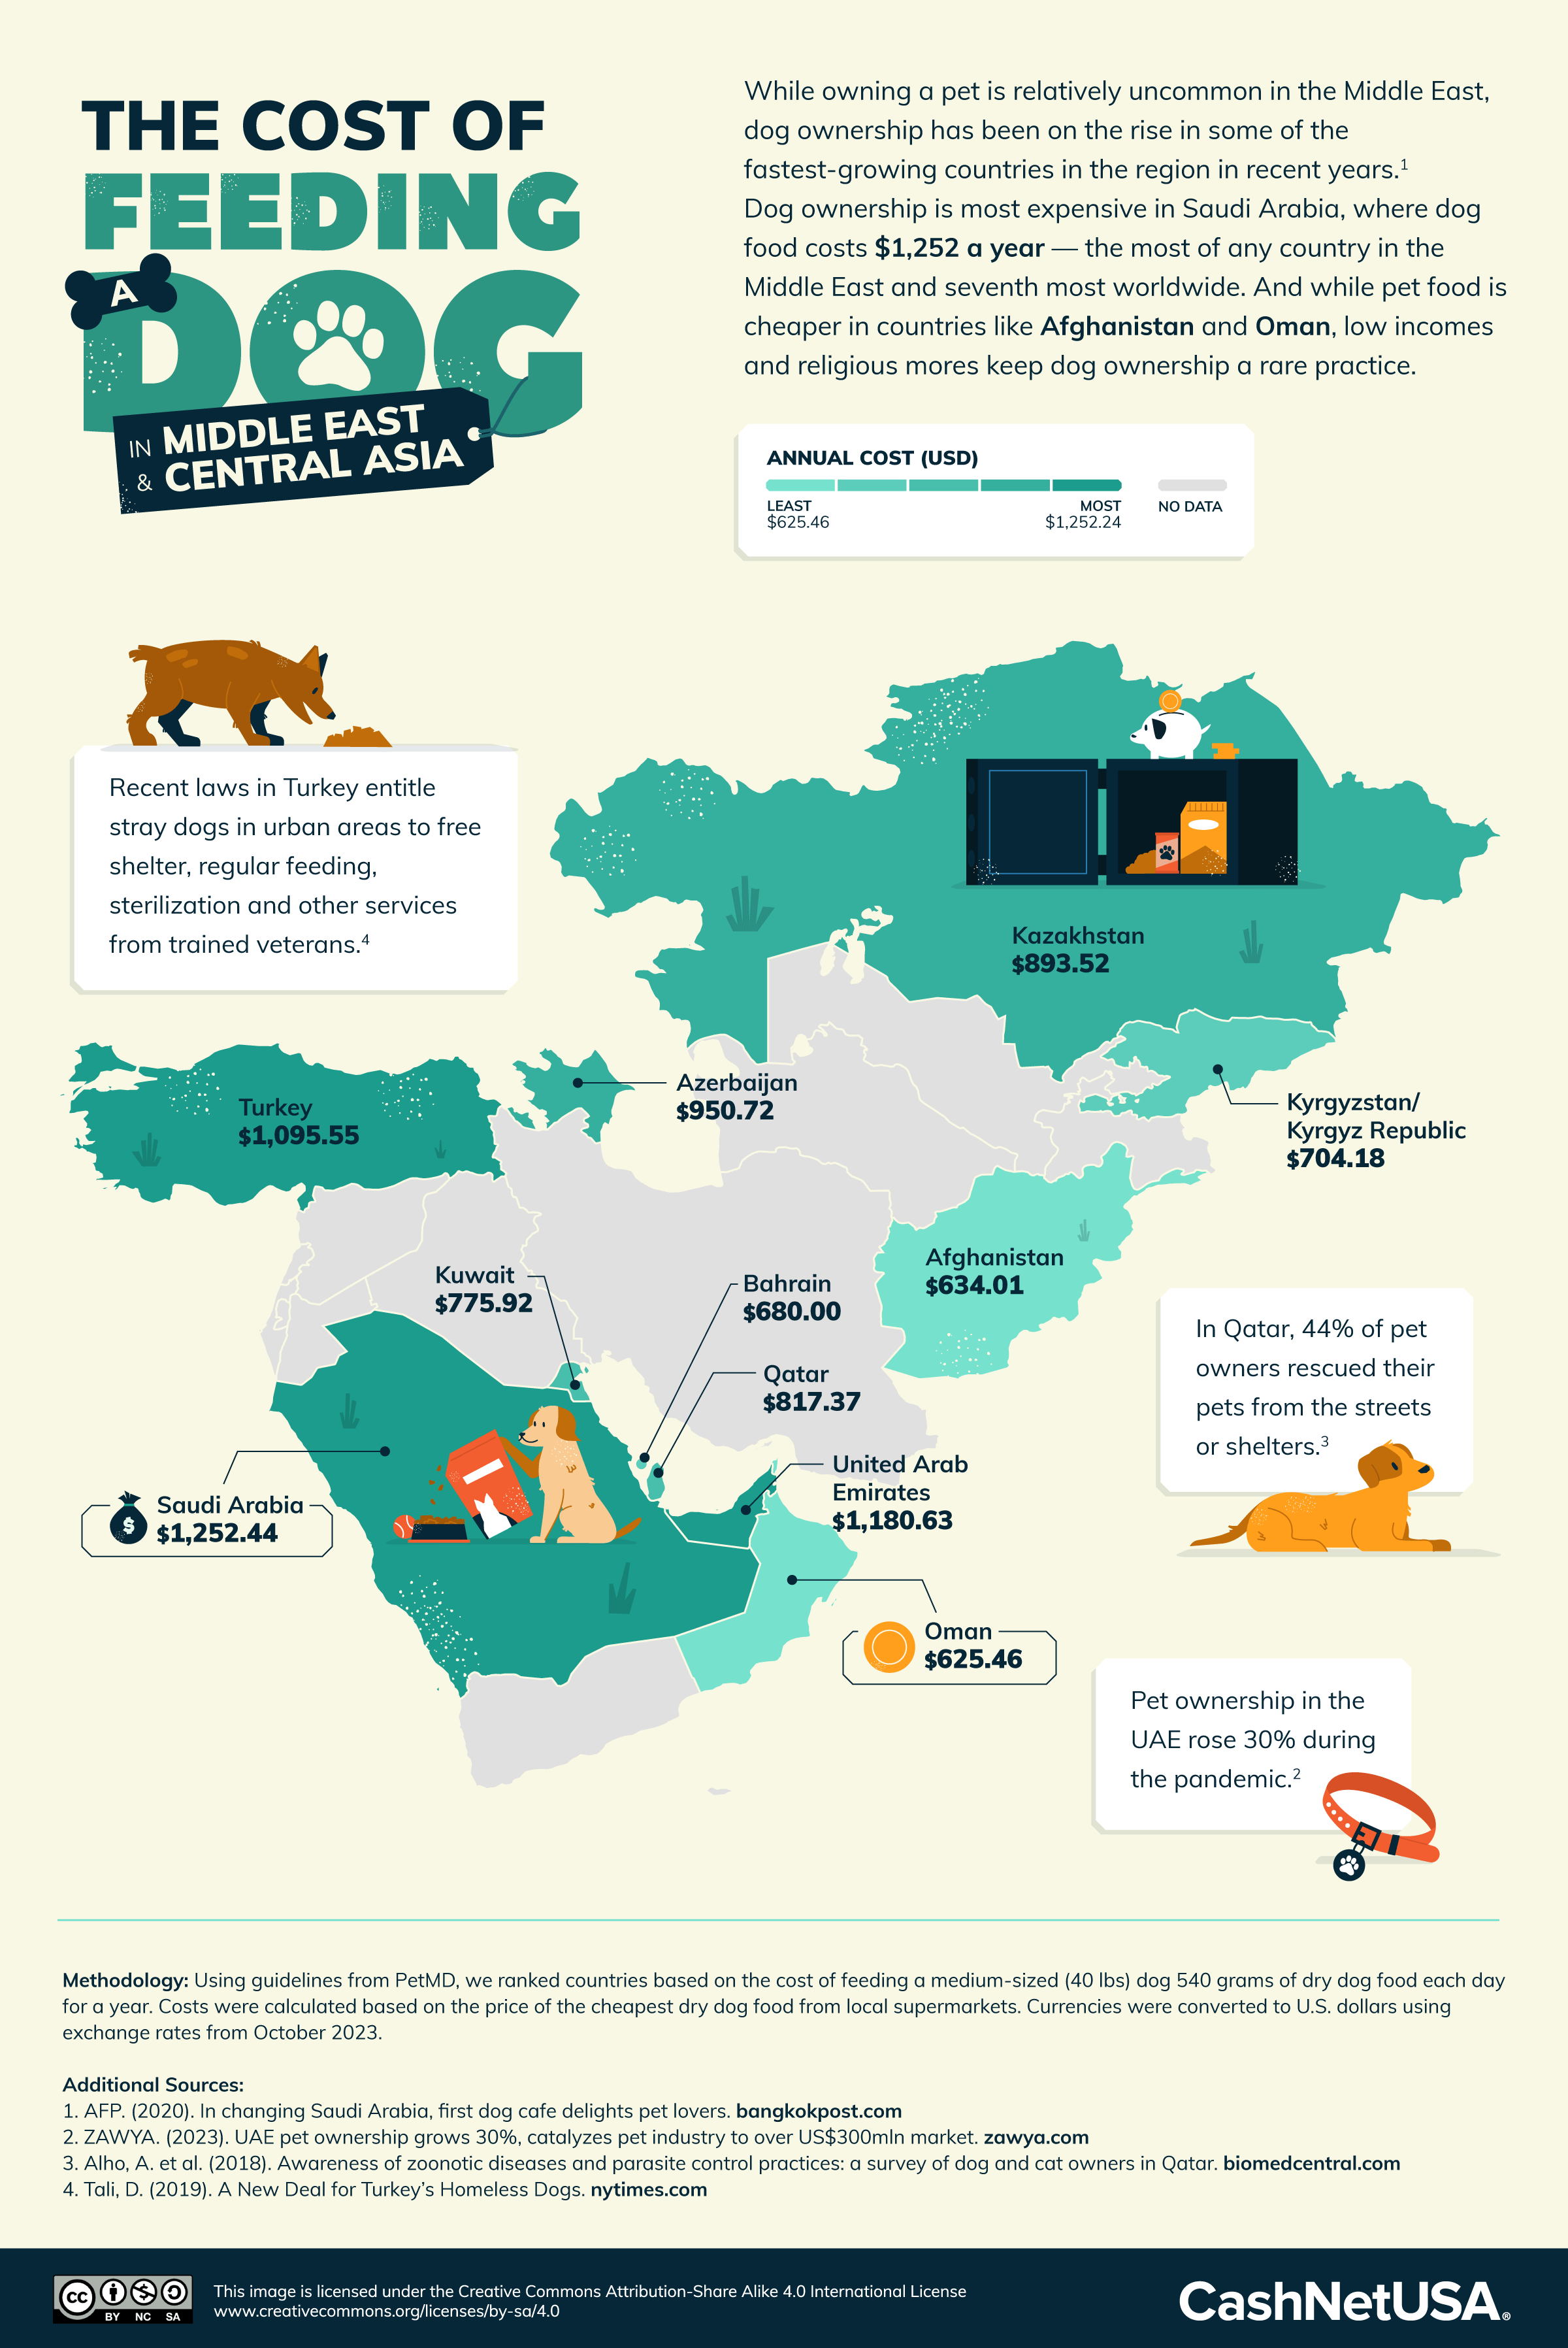 Infographic of the cost of feeding a dog in the Middle East and Central Asia.